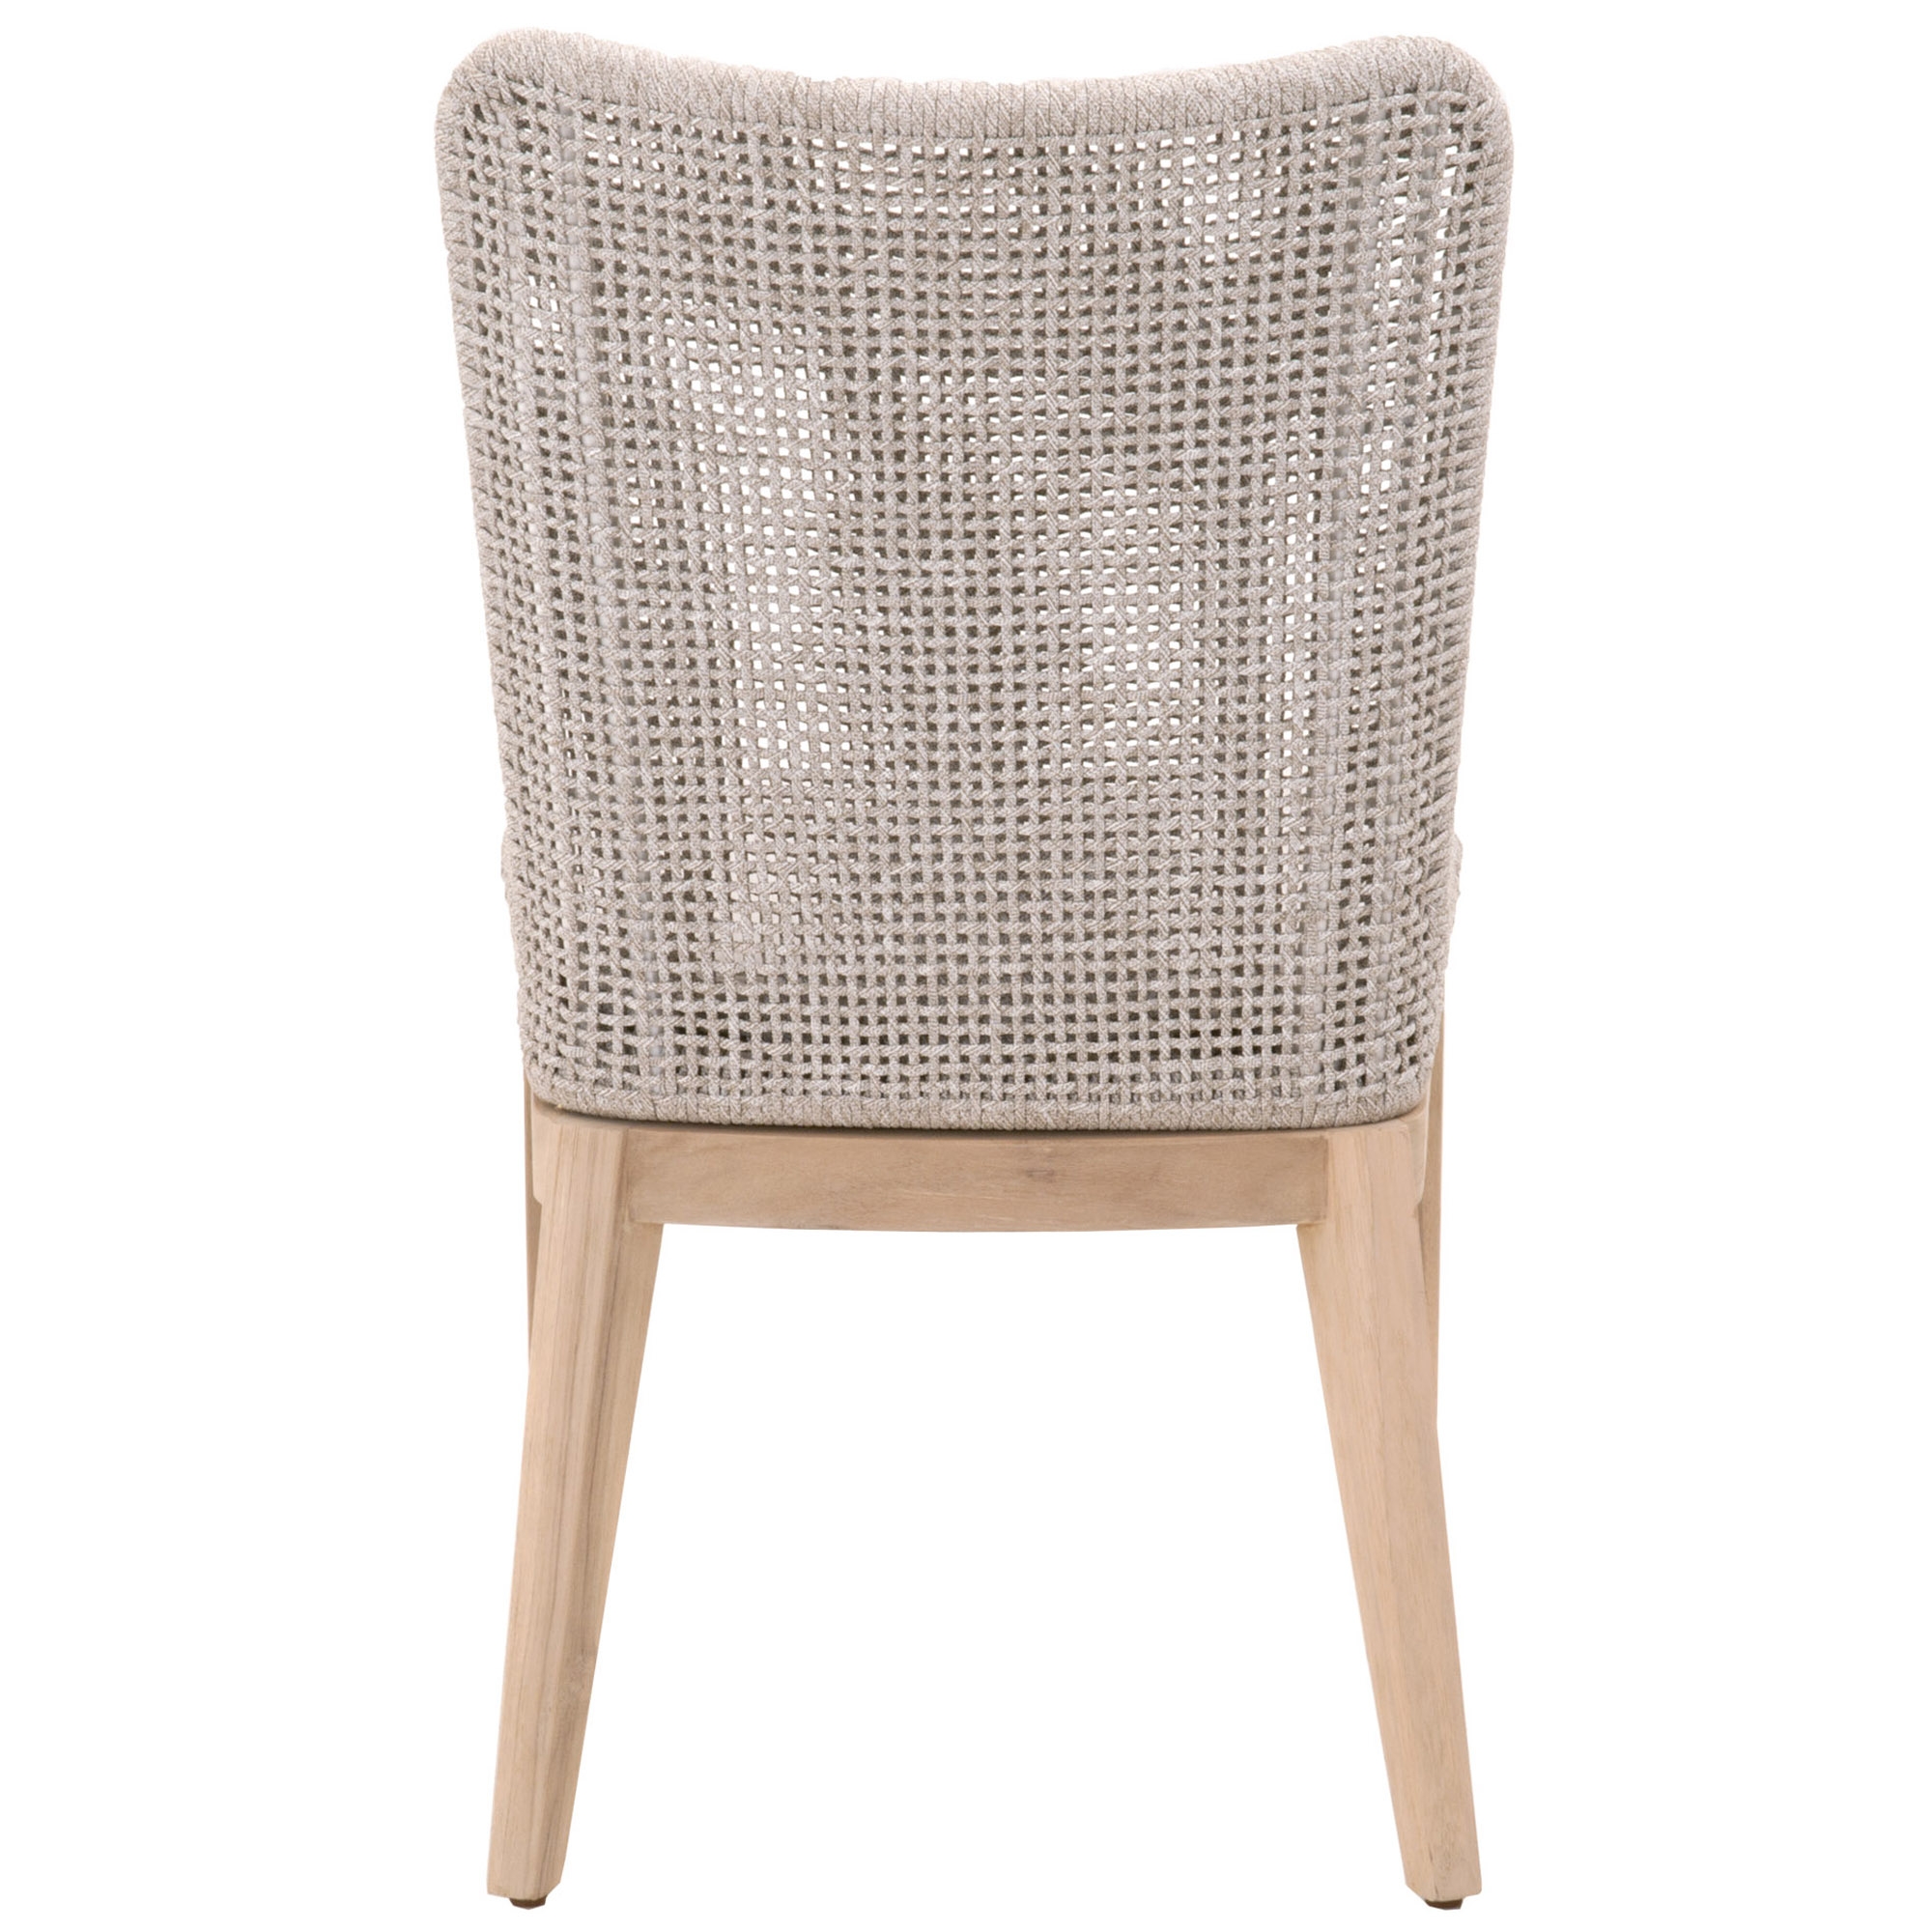 Mesh Outdoor Dining Chair, Gray, Set of 2 - Image 4